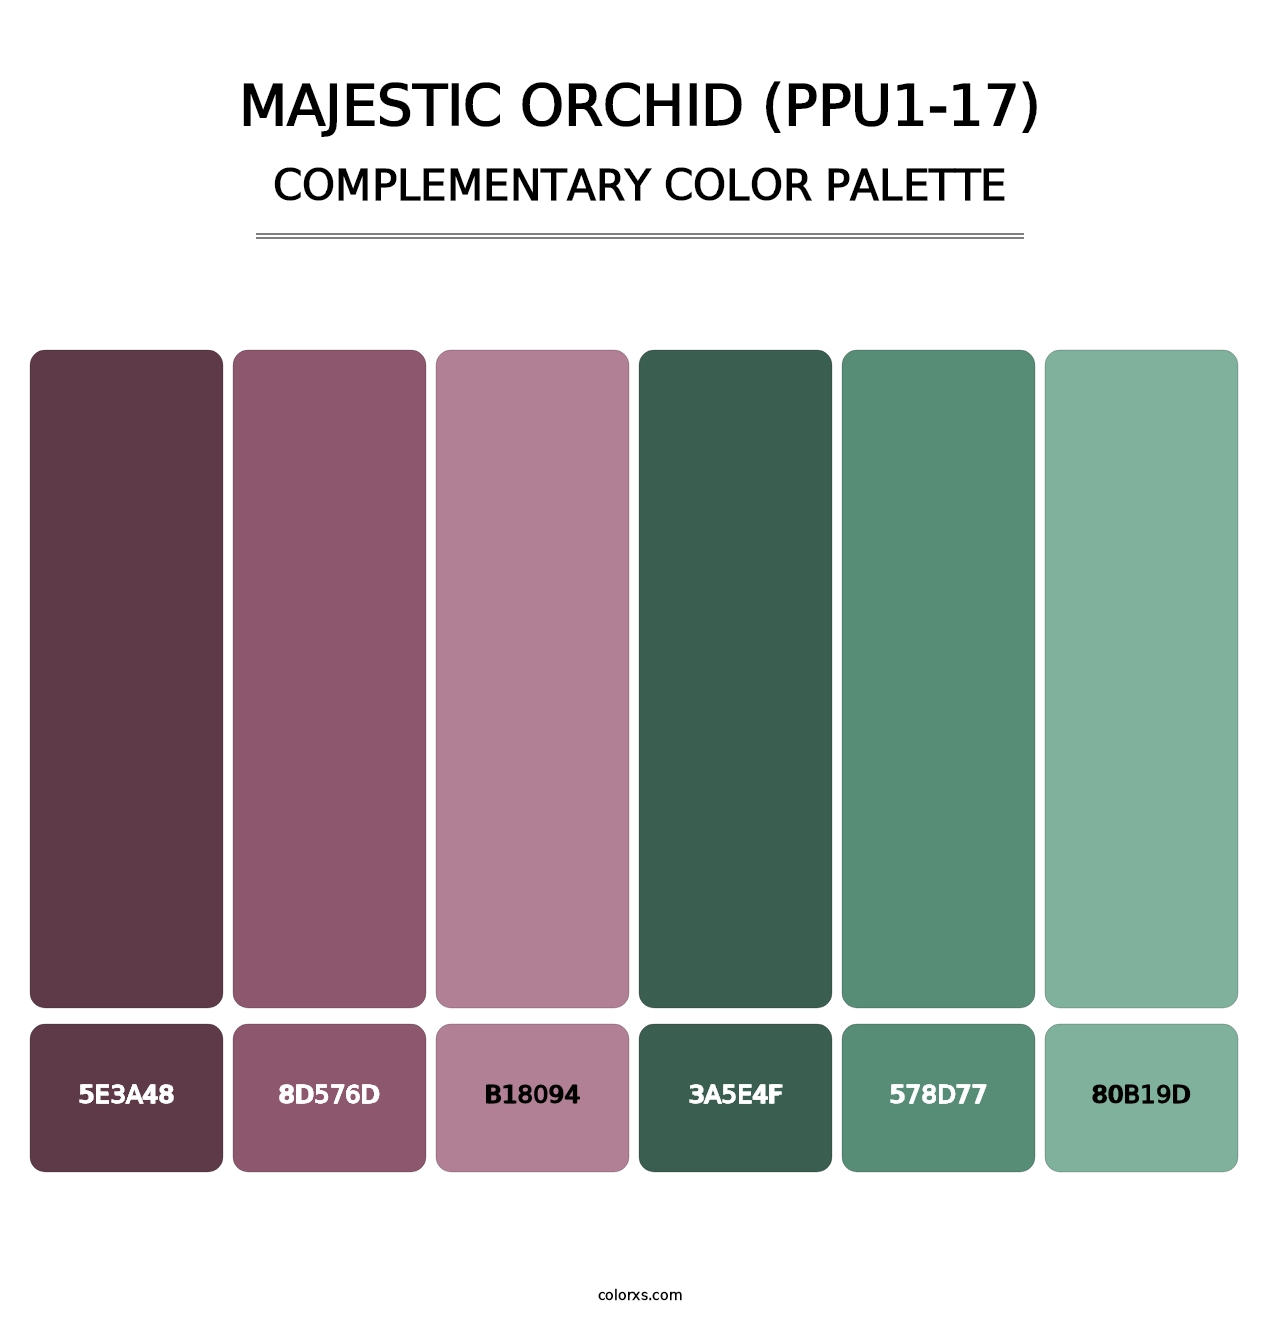 Majestic Orchid (PPU1-17) - Complementary Color Palette